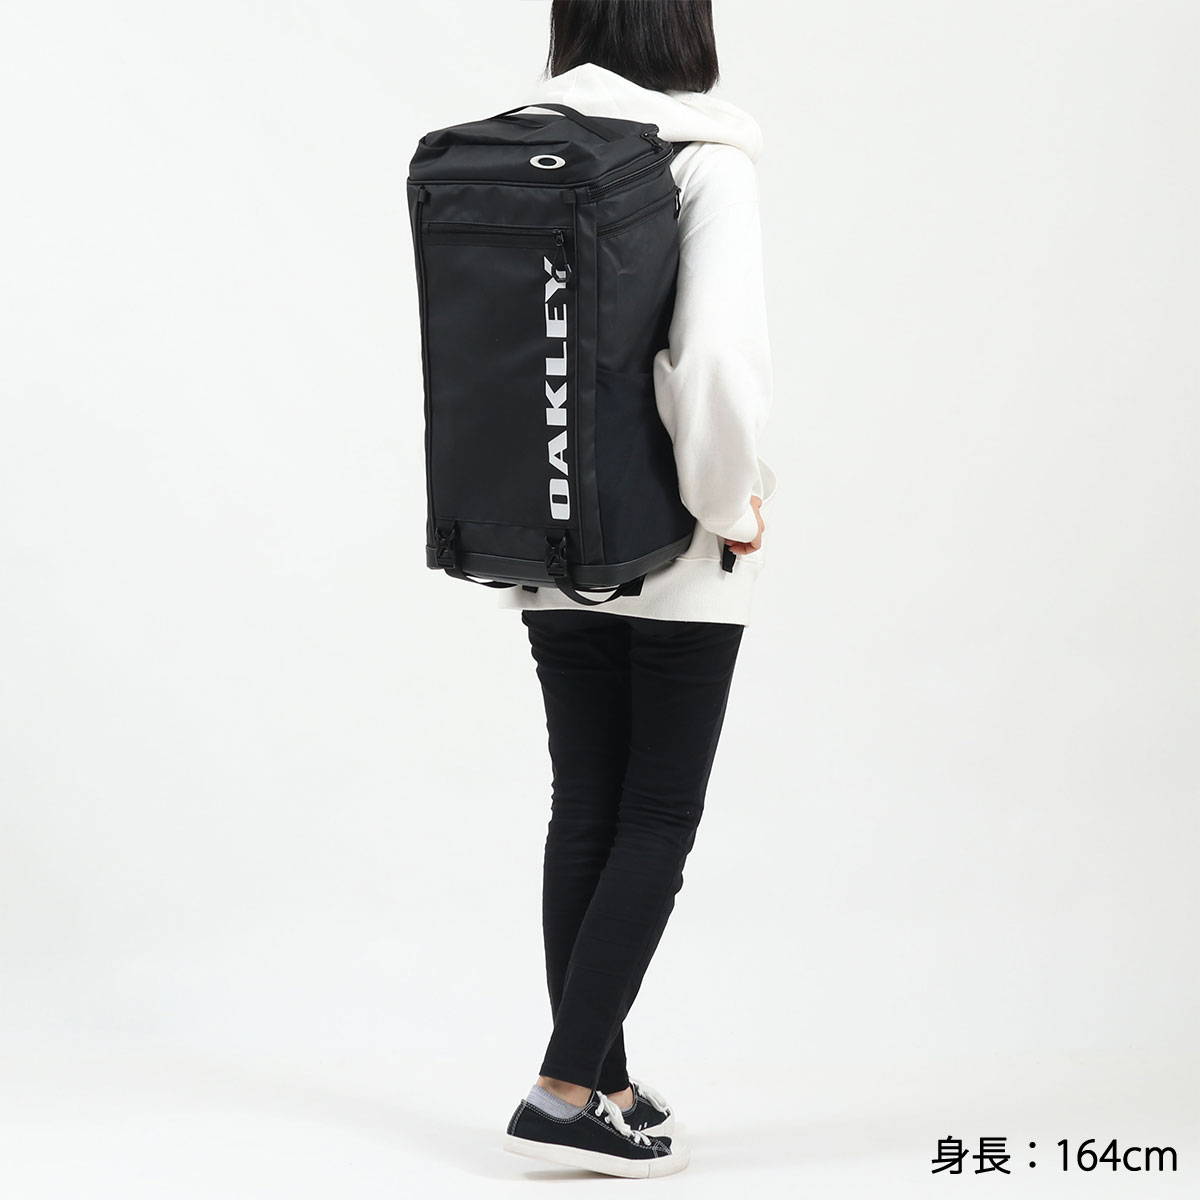 OAKLEY オークリー ESSENTIAL SQUARE PACK XL 5.0 リュックサック 40L 